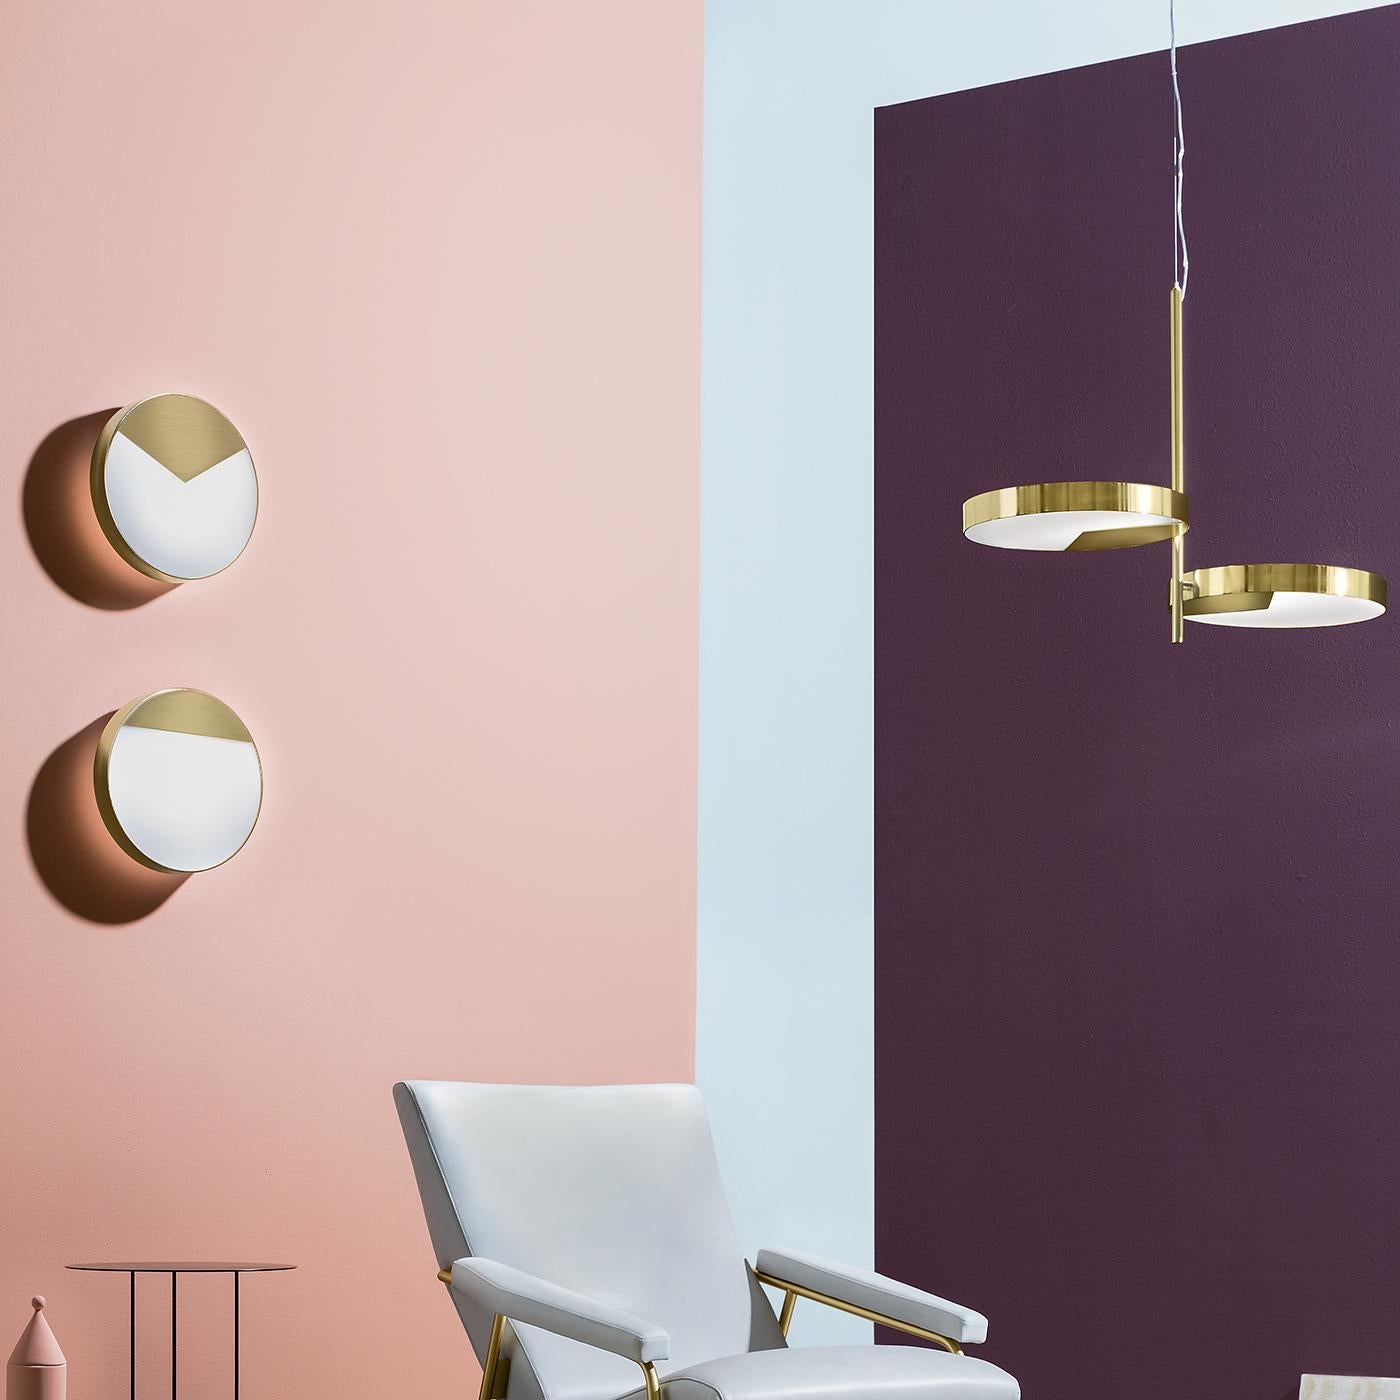 Exuding restrained and timeless elegance, the Moonlight sconce by Matteo Zorzenoni is a versatile object of decor suitable for both modern and eclectic interiors. The round metal structure shares the polished brass finish with a semi-circular metal